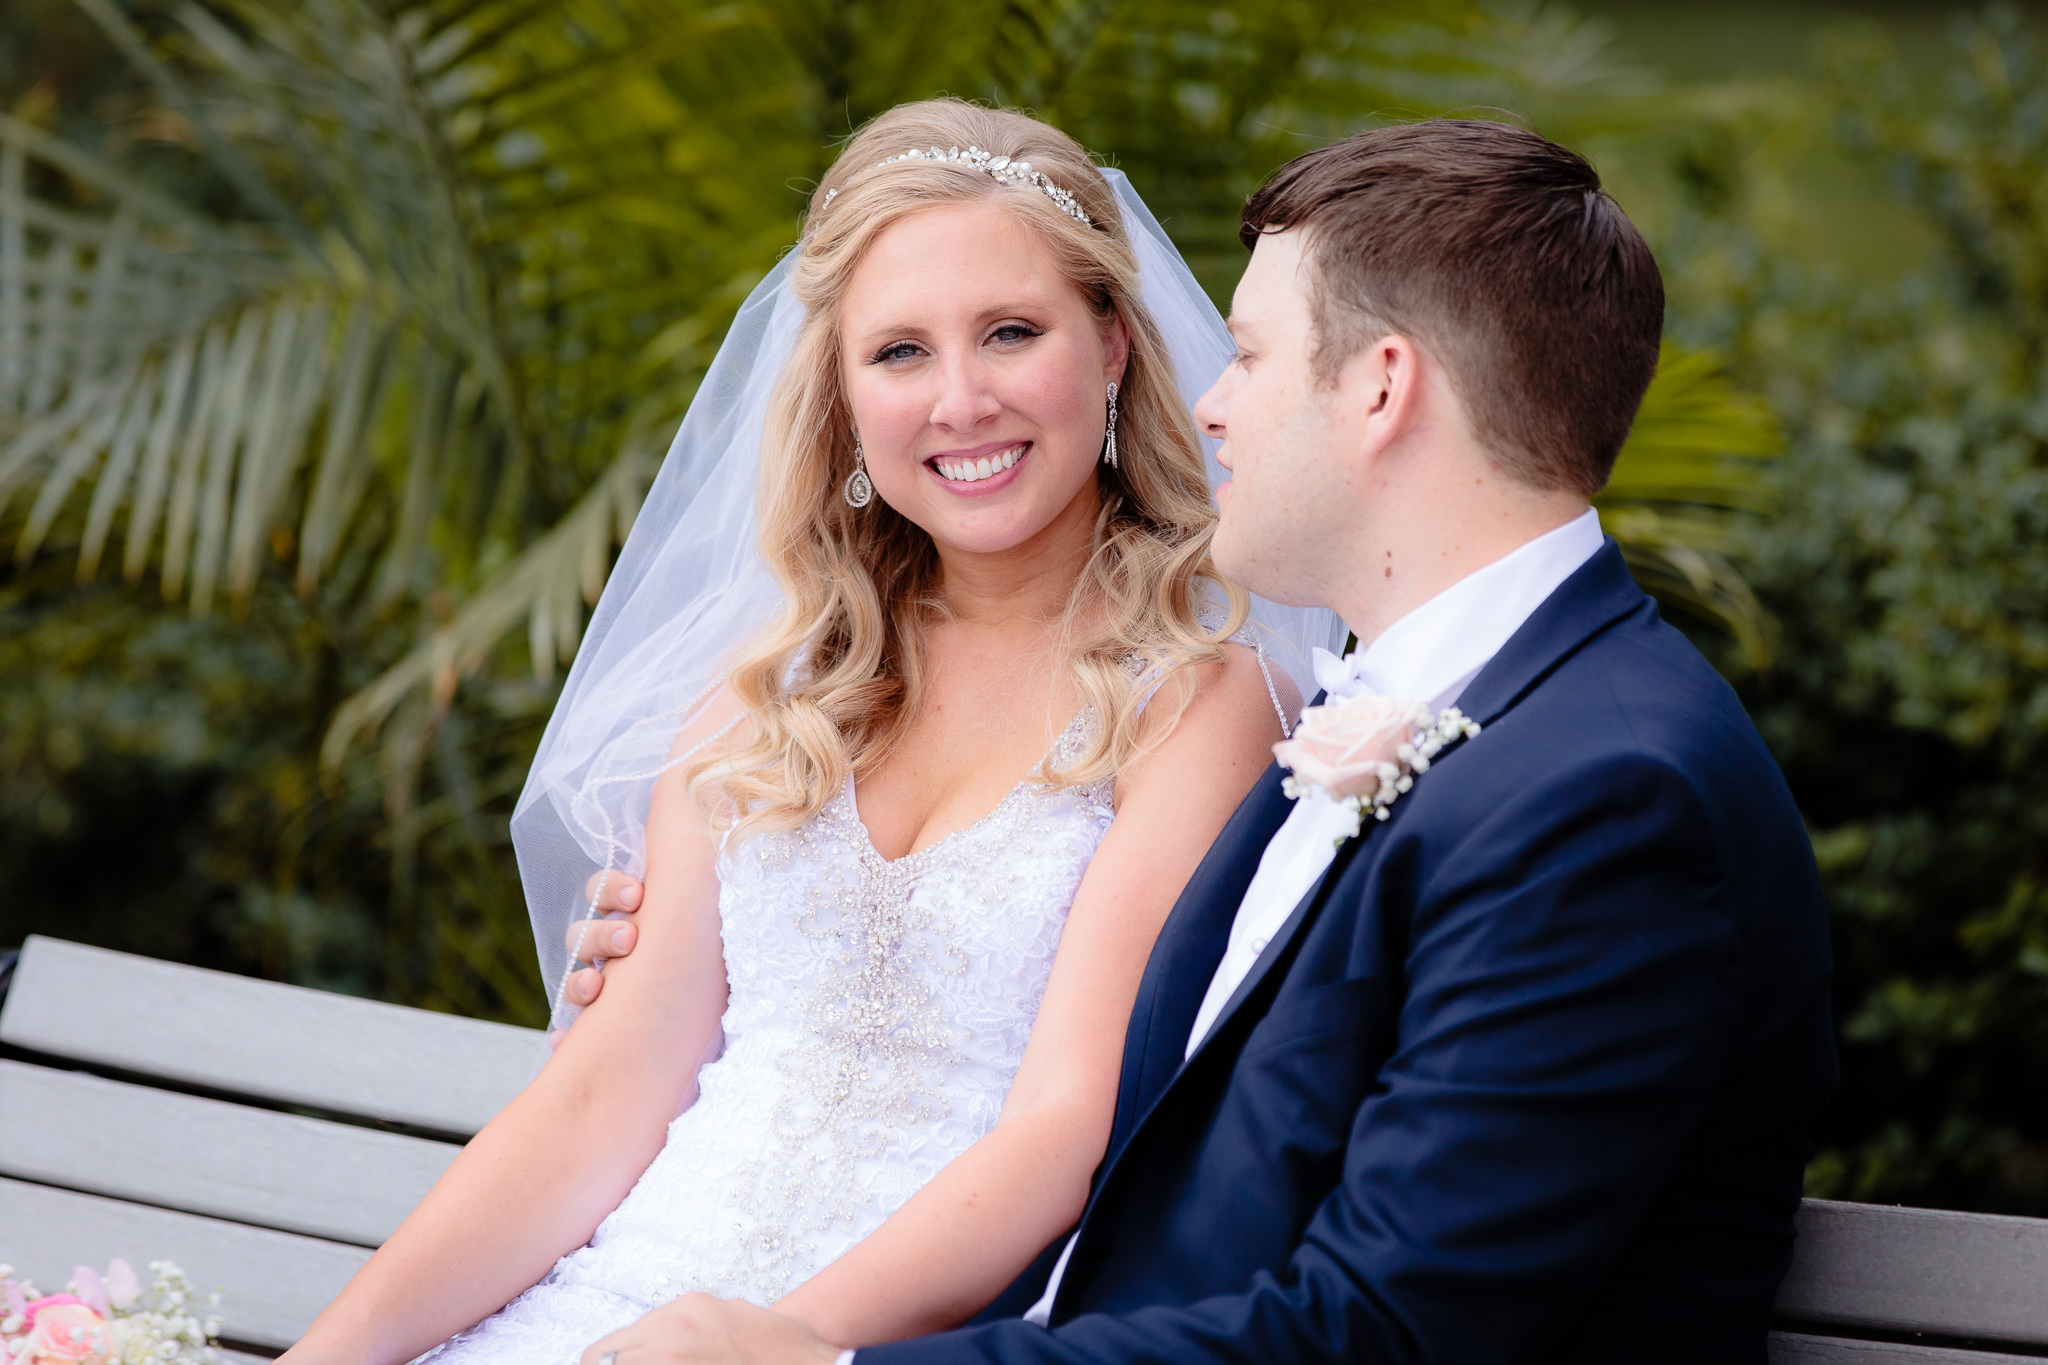 Bride smiles with her groom at Duquesne University